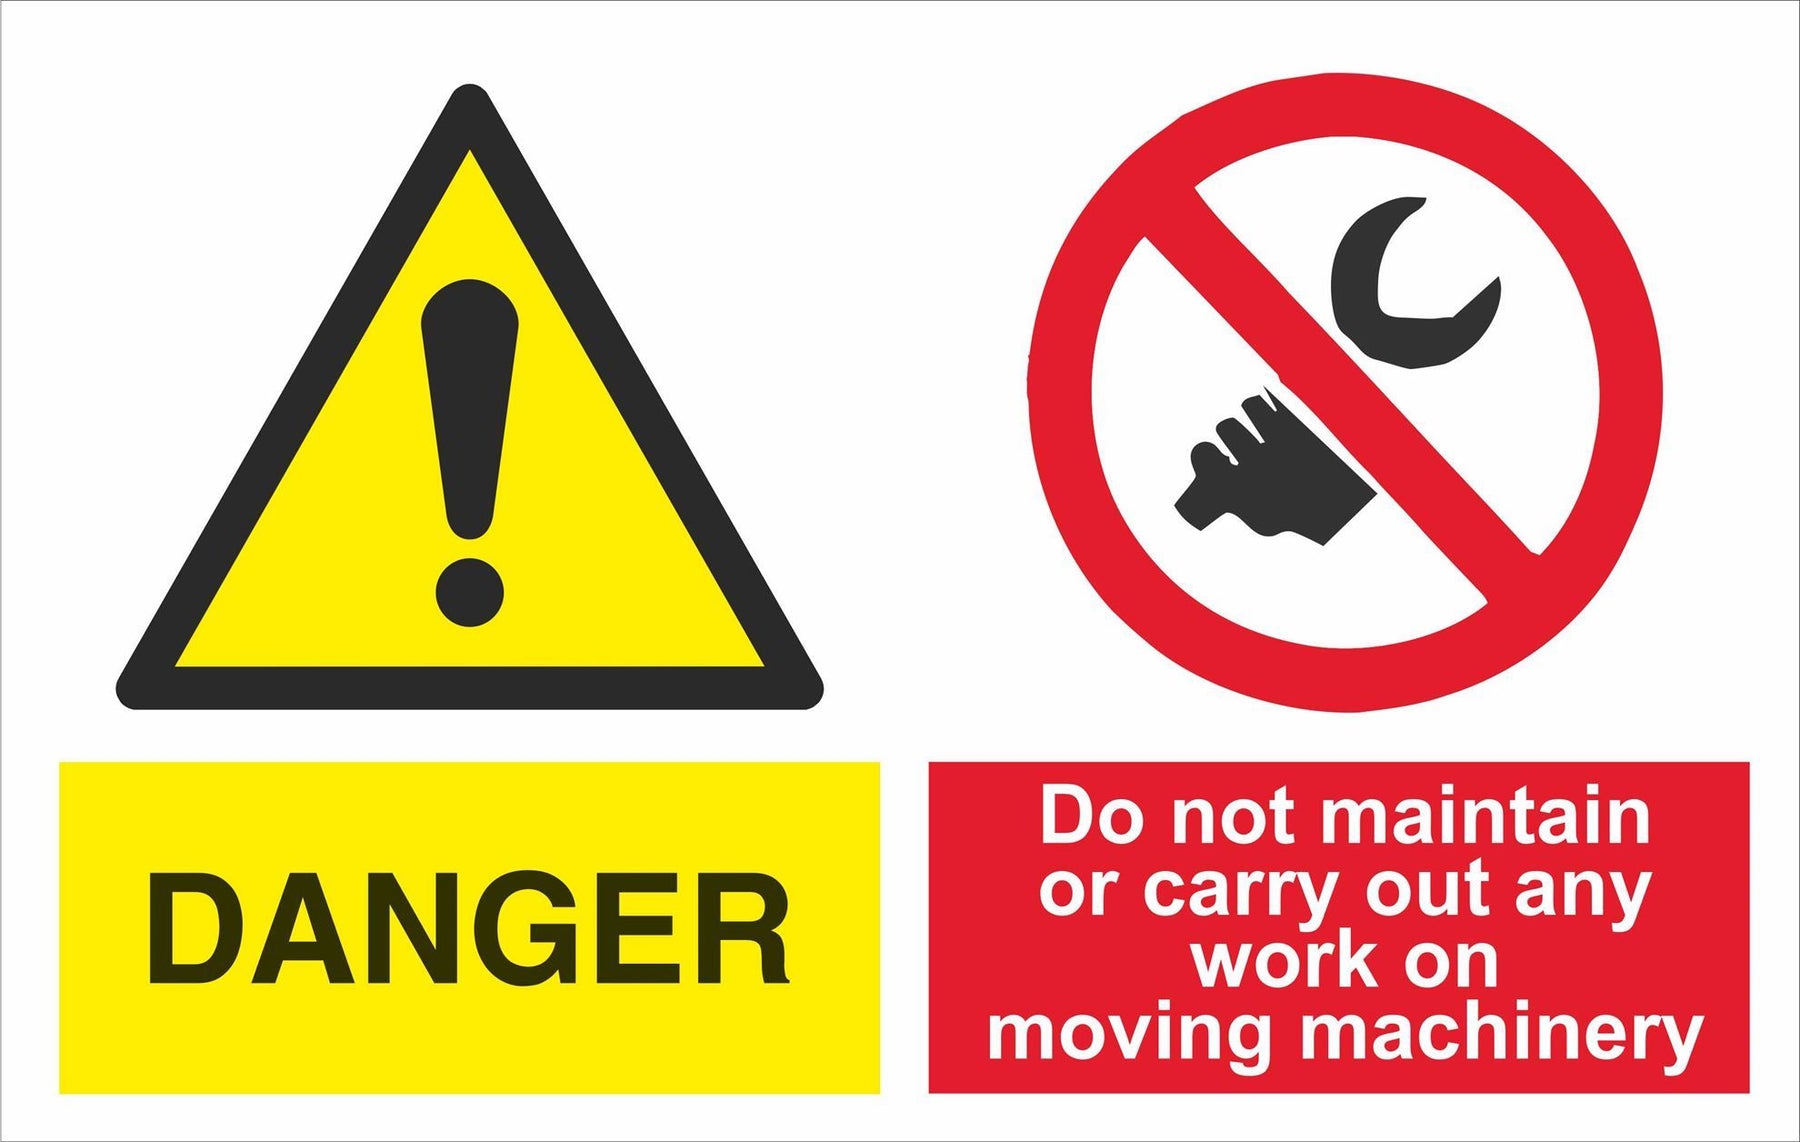 DANGER Do not maintain or carry out work on moving machinery